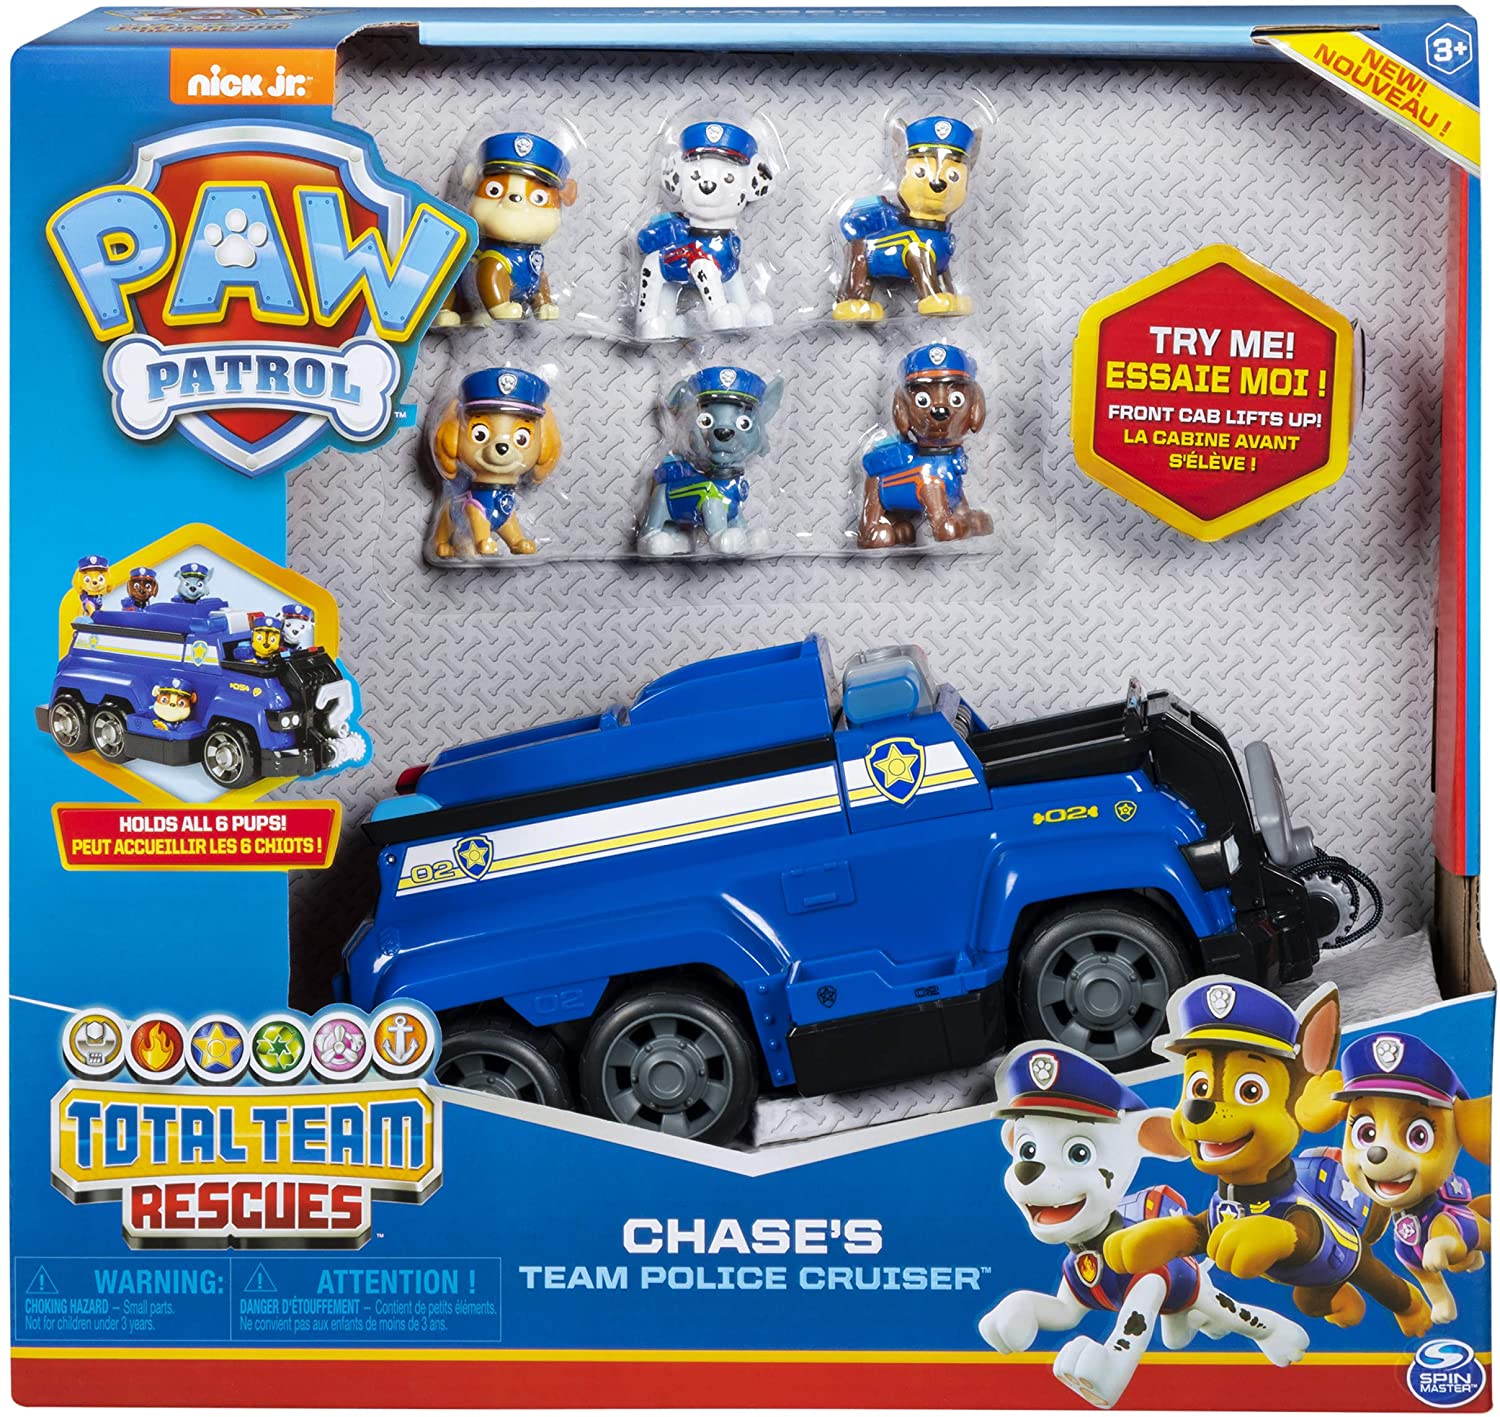 Patrol Team Rescue Chase Police Vehicle | Top Toys